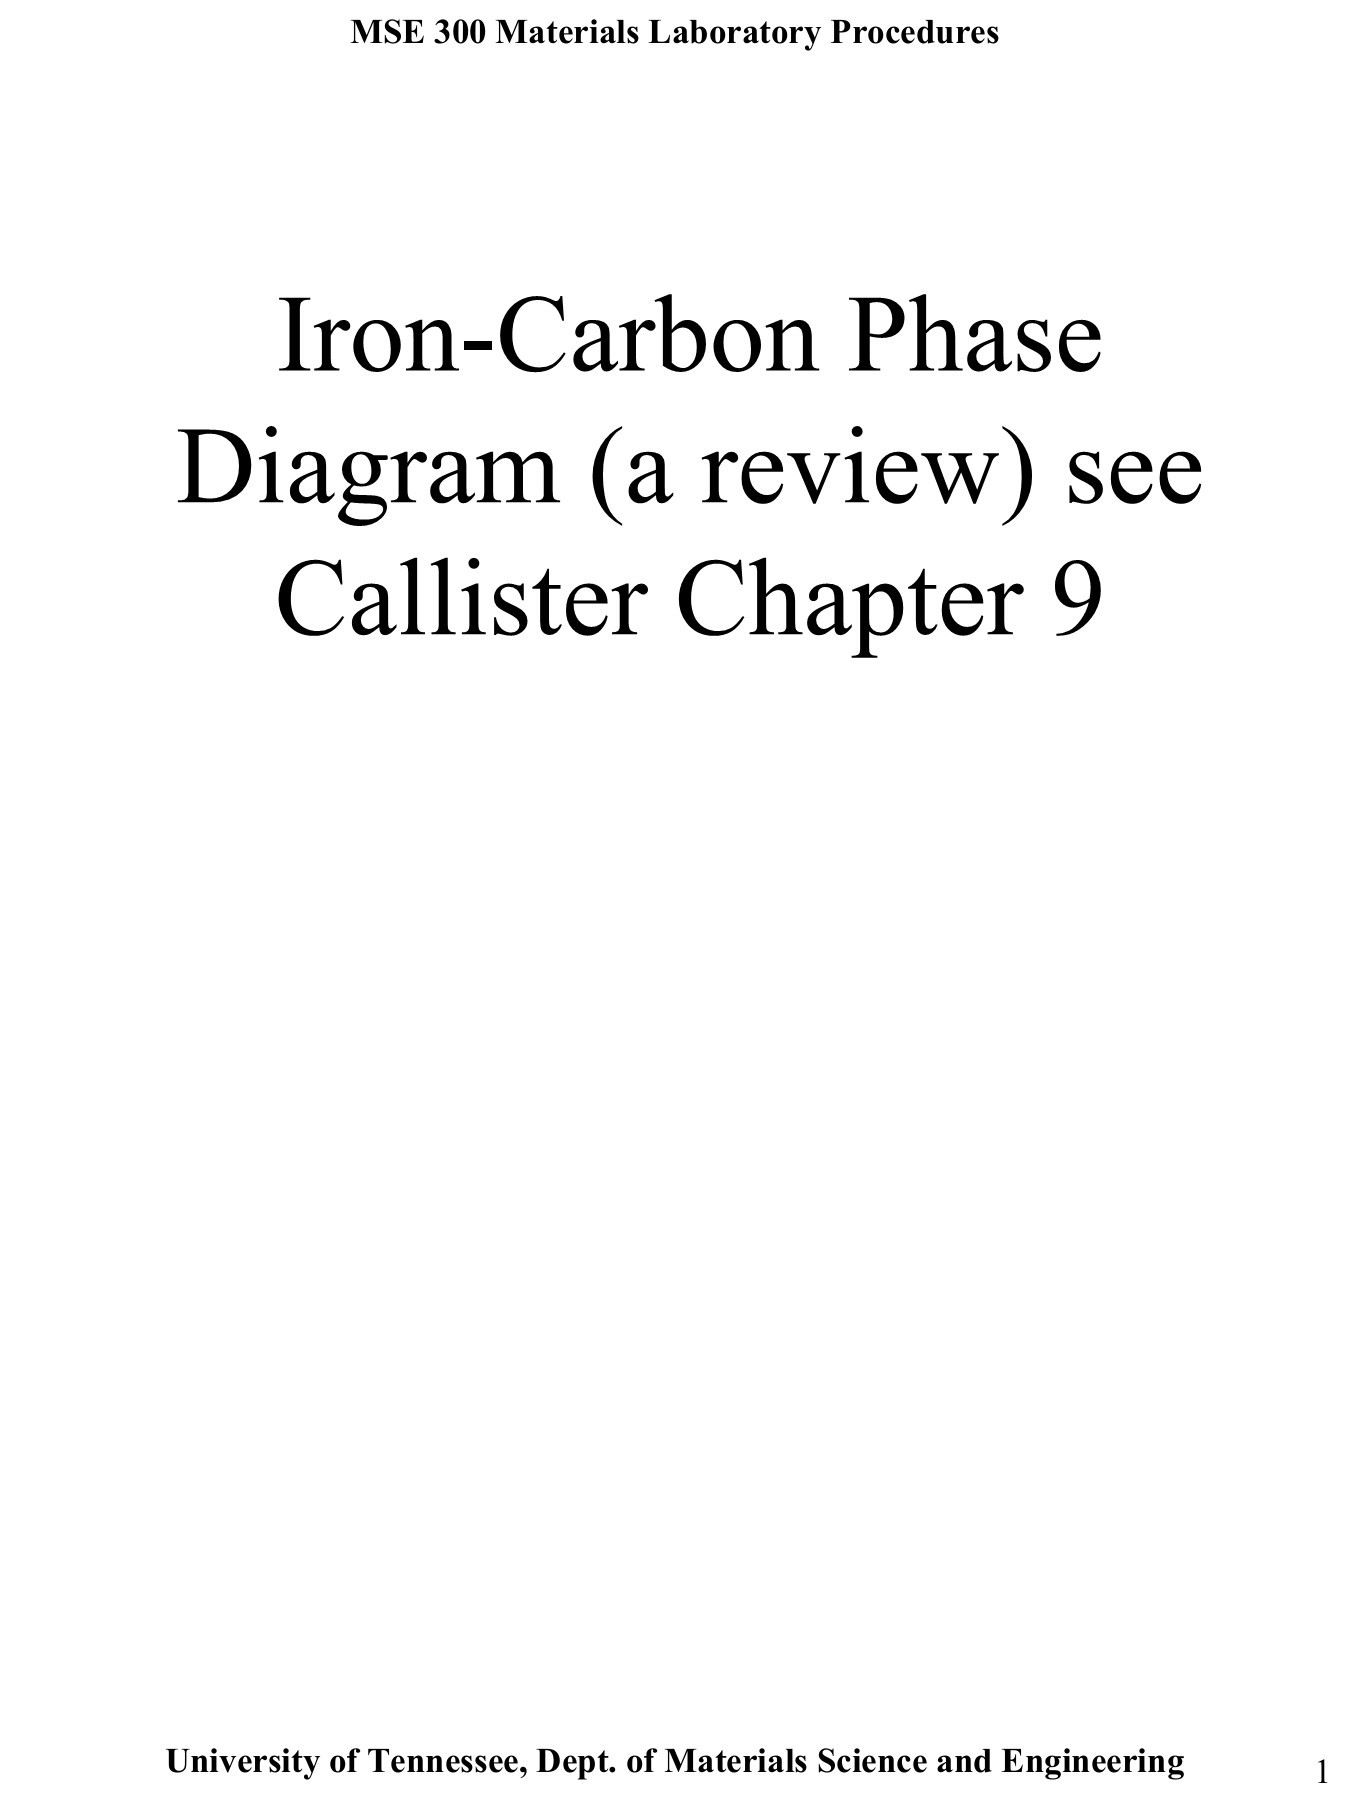 Iron Carbon Phase Diagram Iron Carbon Phase Diagram A Review See Callister Chapter 9 Pages 1